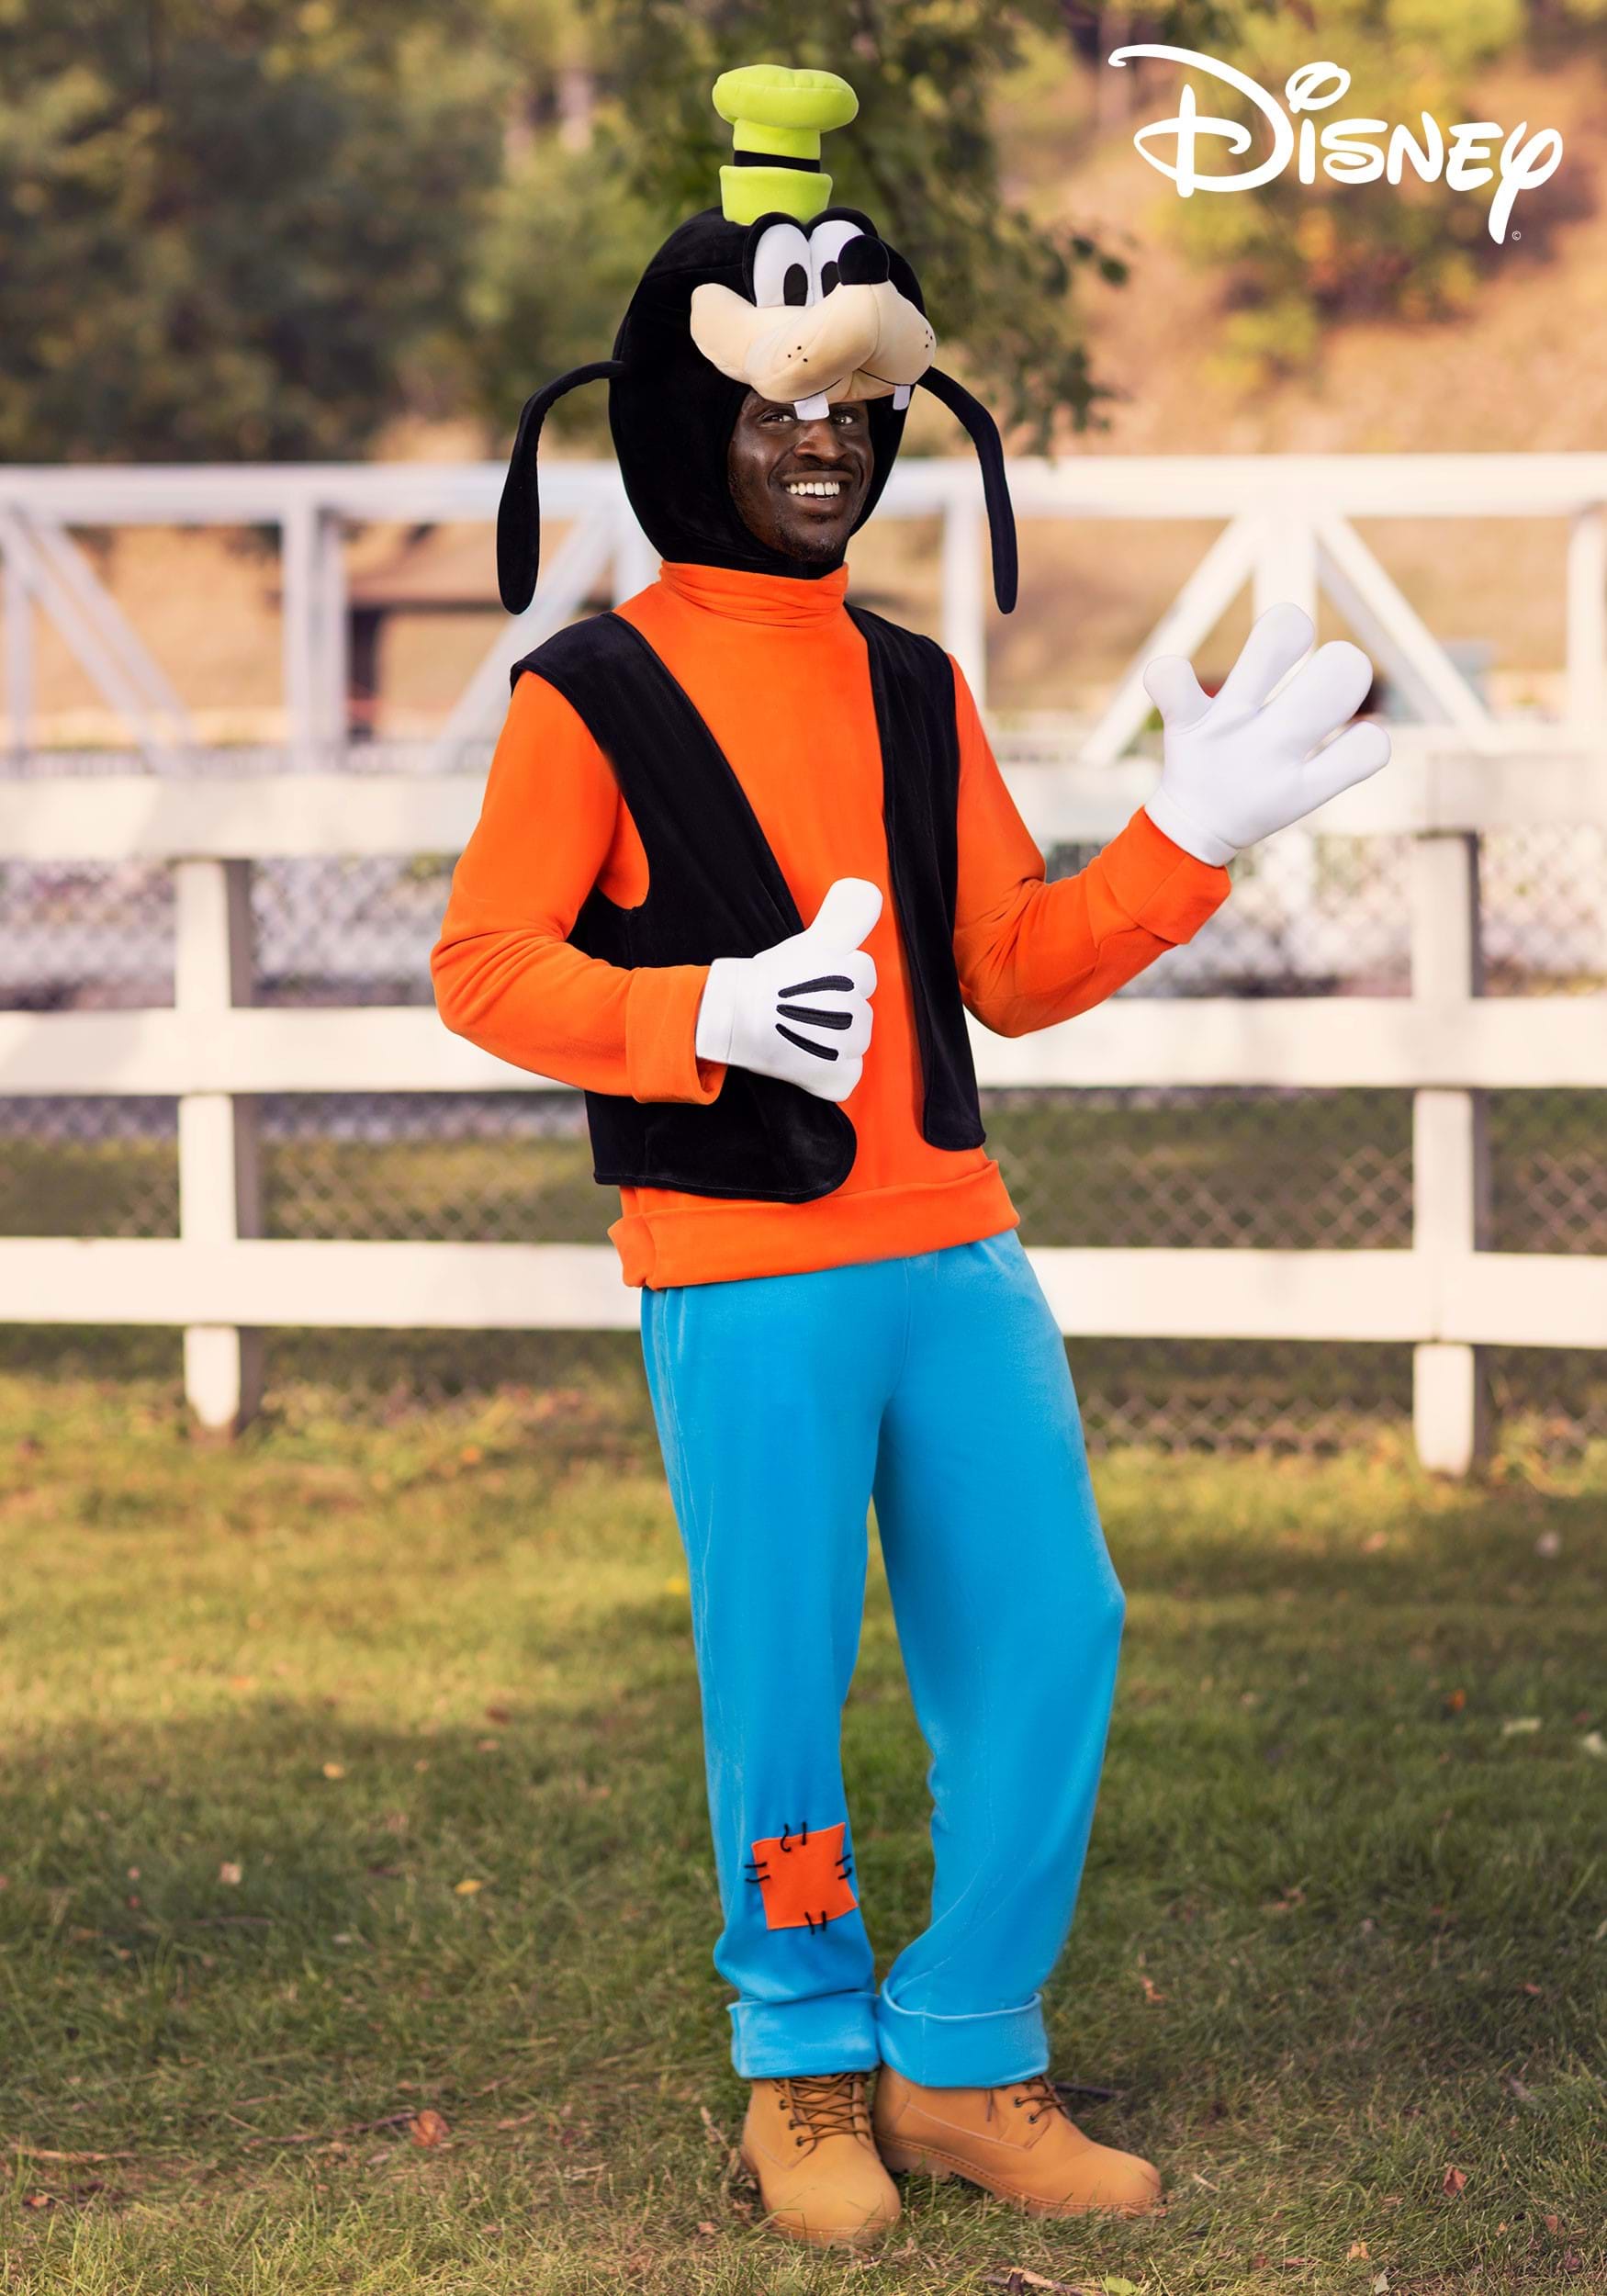 https://images.halloweencostumes.com/products/75289/1-1/adult-deluxe-goofy-costume.jpg